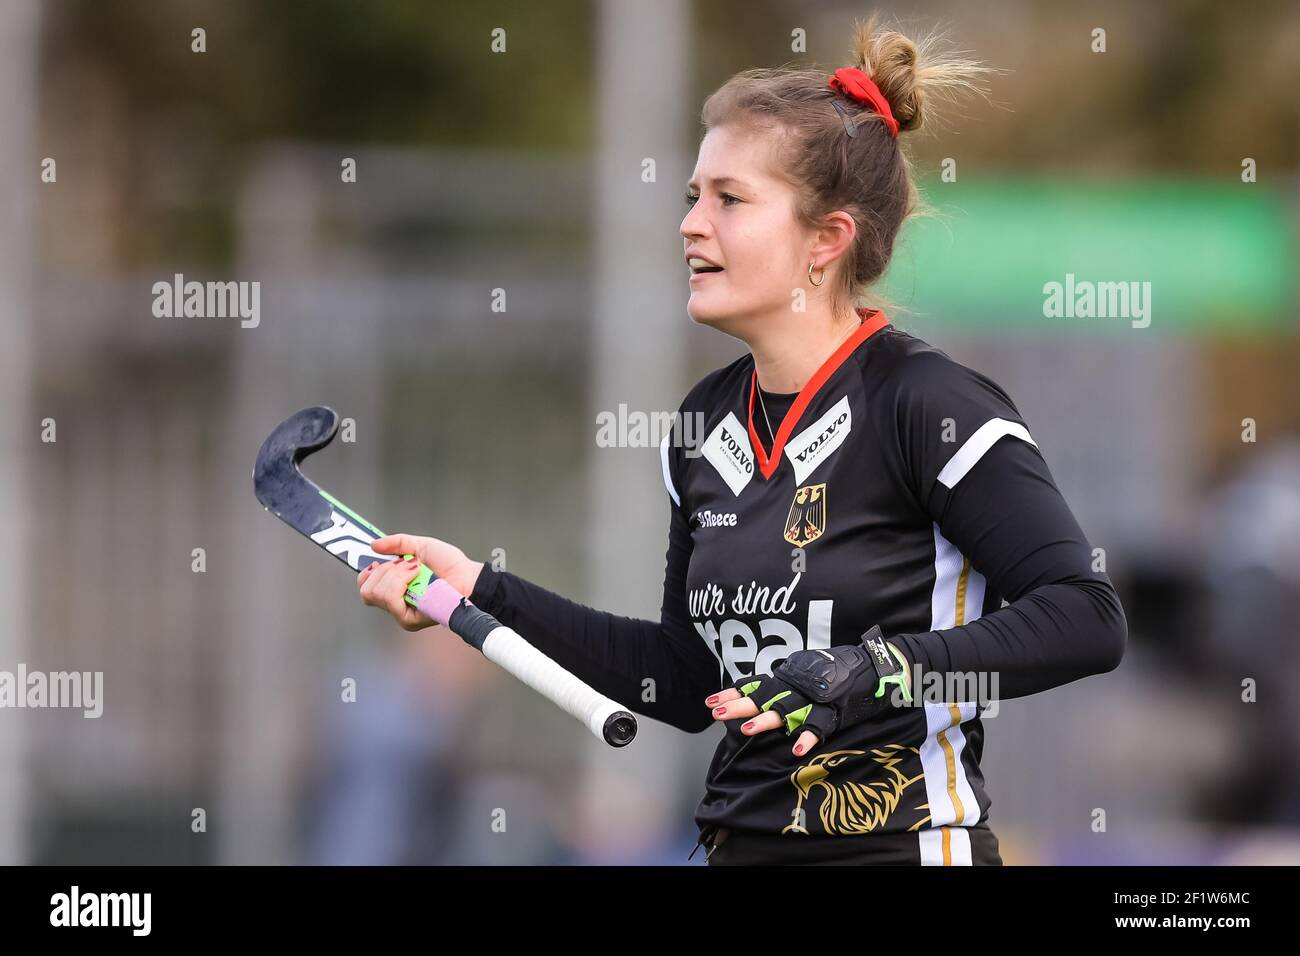 AMSTELVEEN, NETHERLANDS - MARCH 6: Sonja Zimmermann of Germany during the FIH Pro League match between Netherlands Women and Germany Women at Wagener Stock Photo